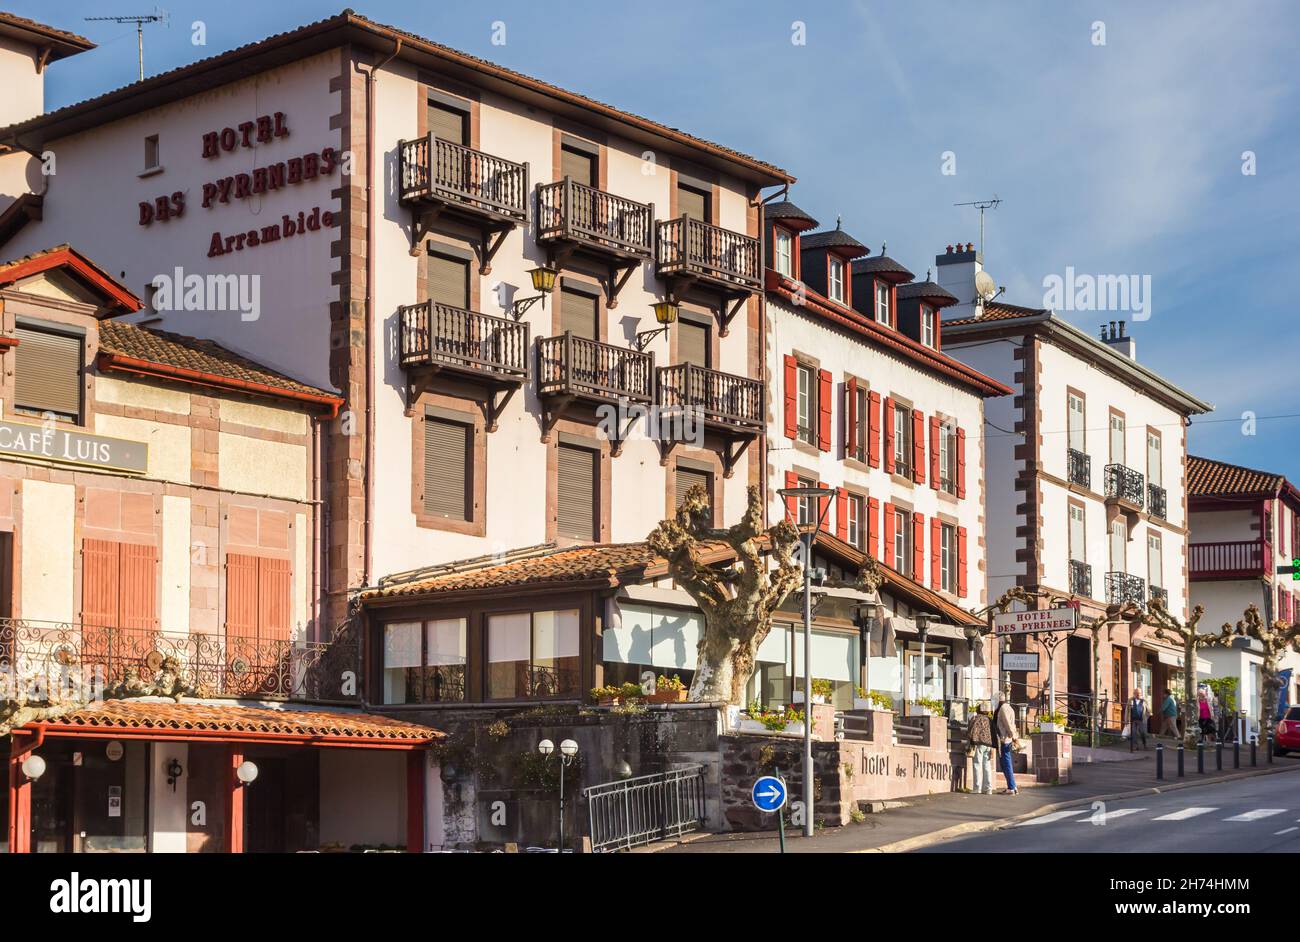 Central square with hotels and restaurants in Saint-Jean-Pied-de-Port, France Stock Photo